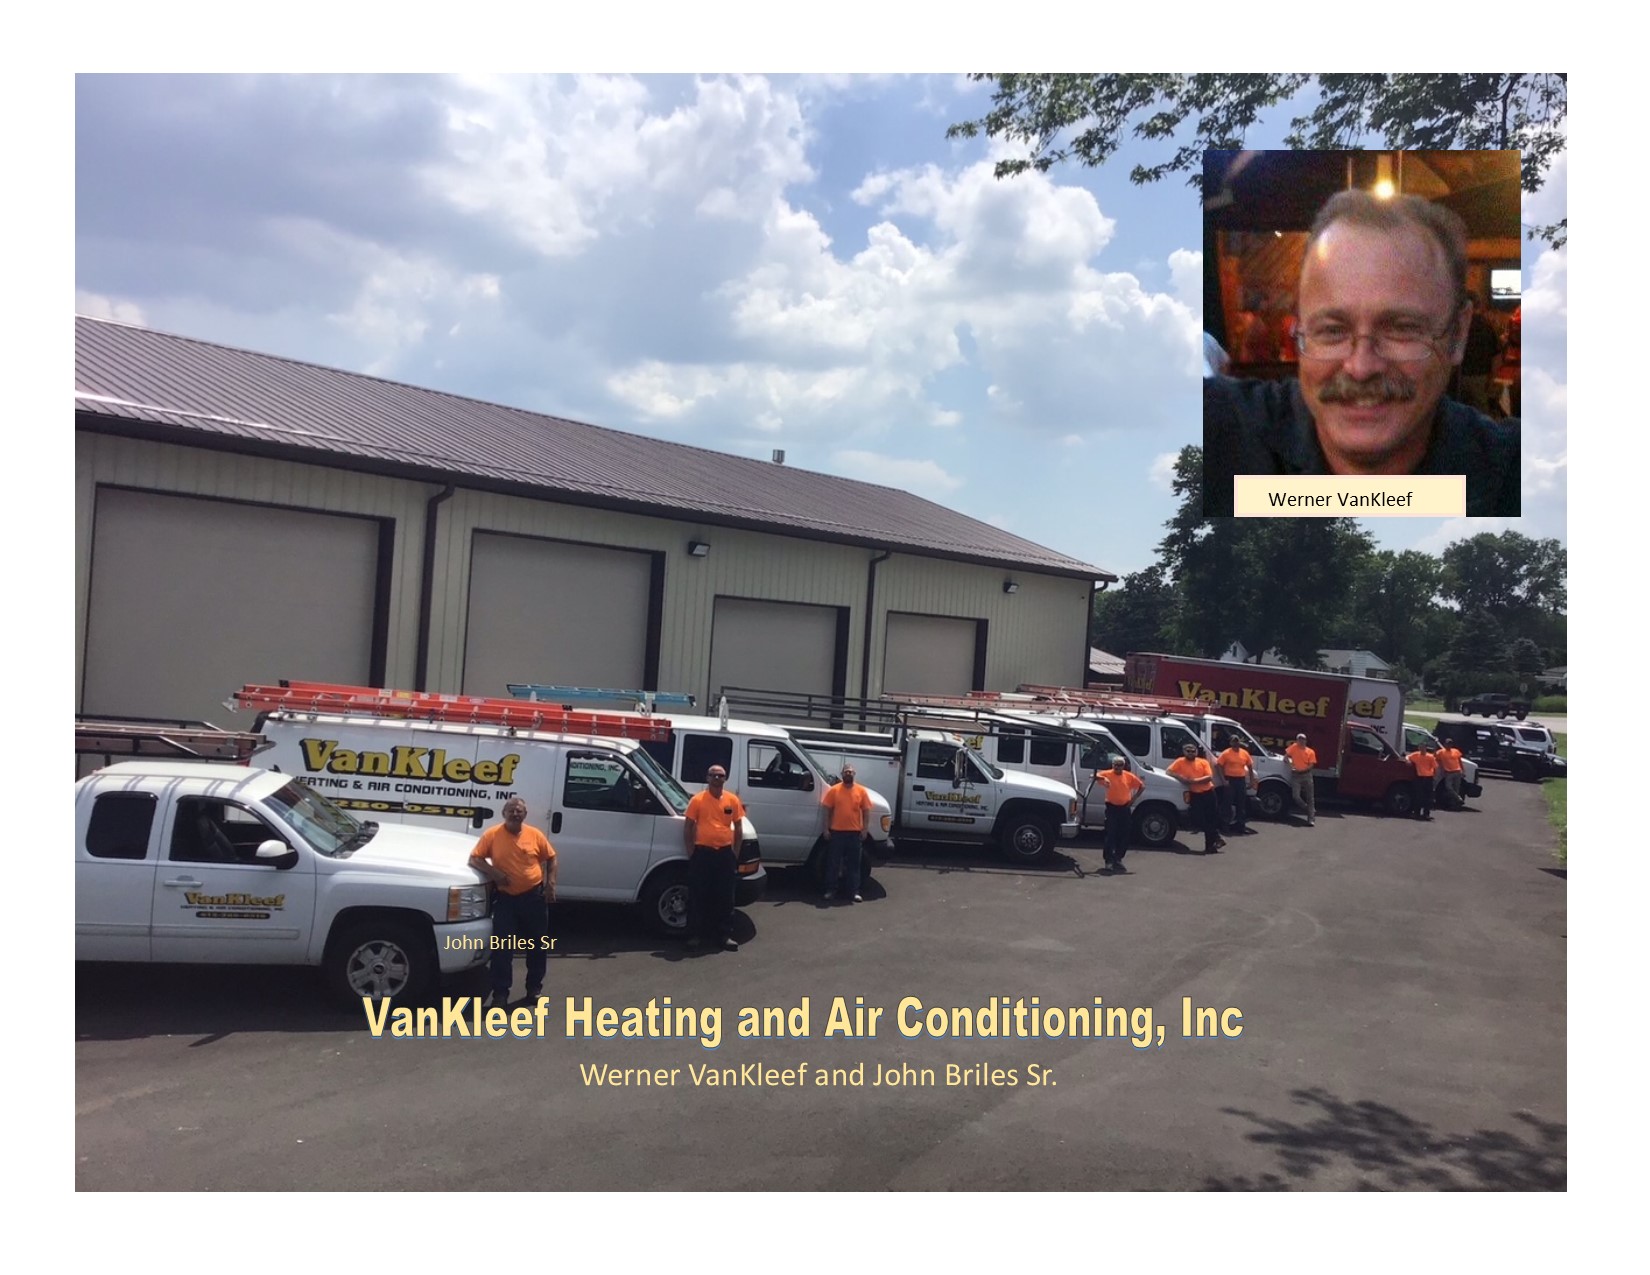 VanKleef Heating and Air Conditioning Inc